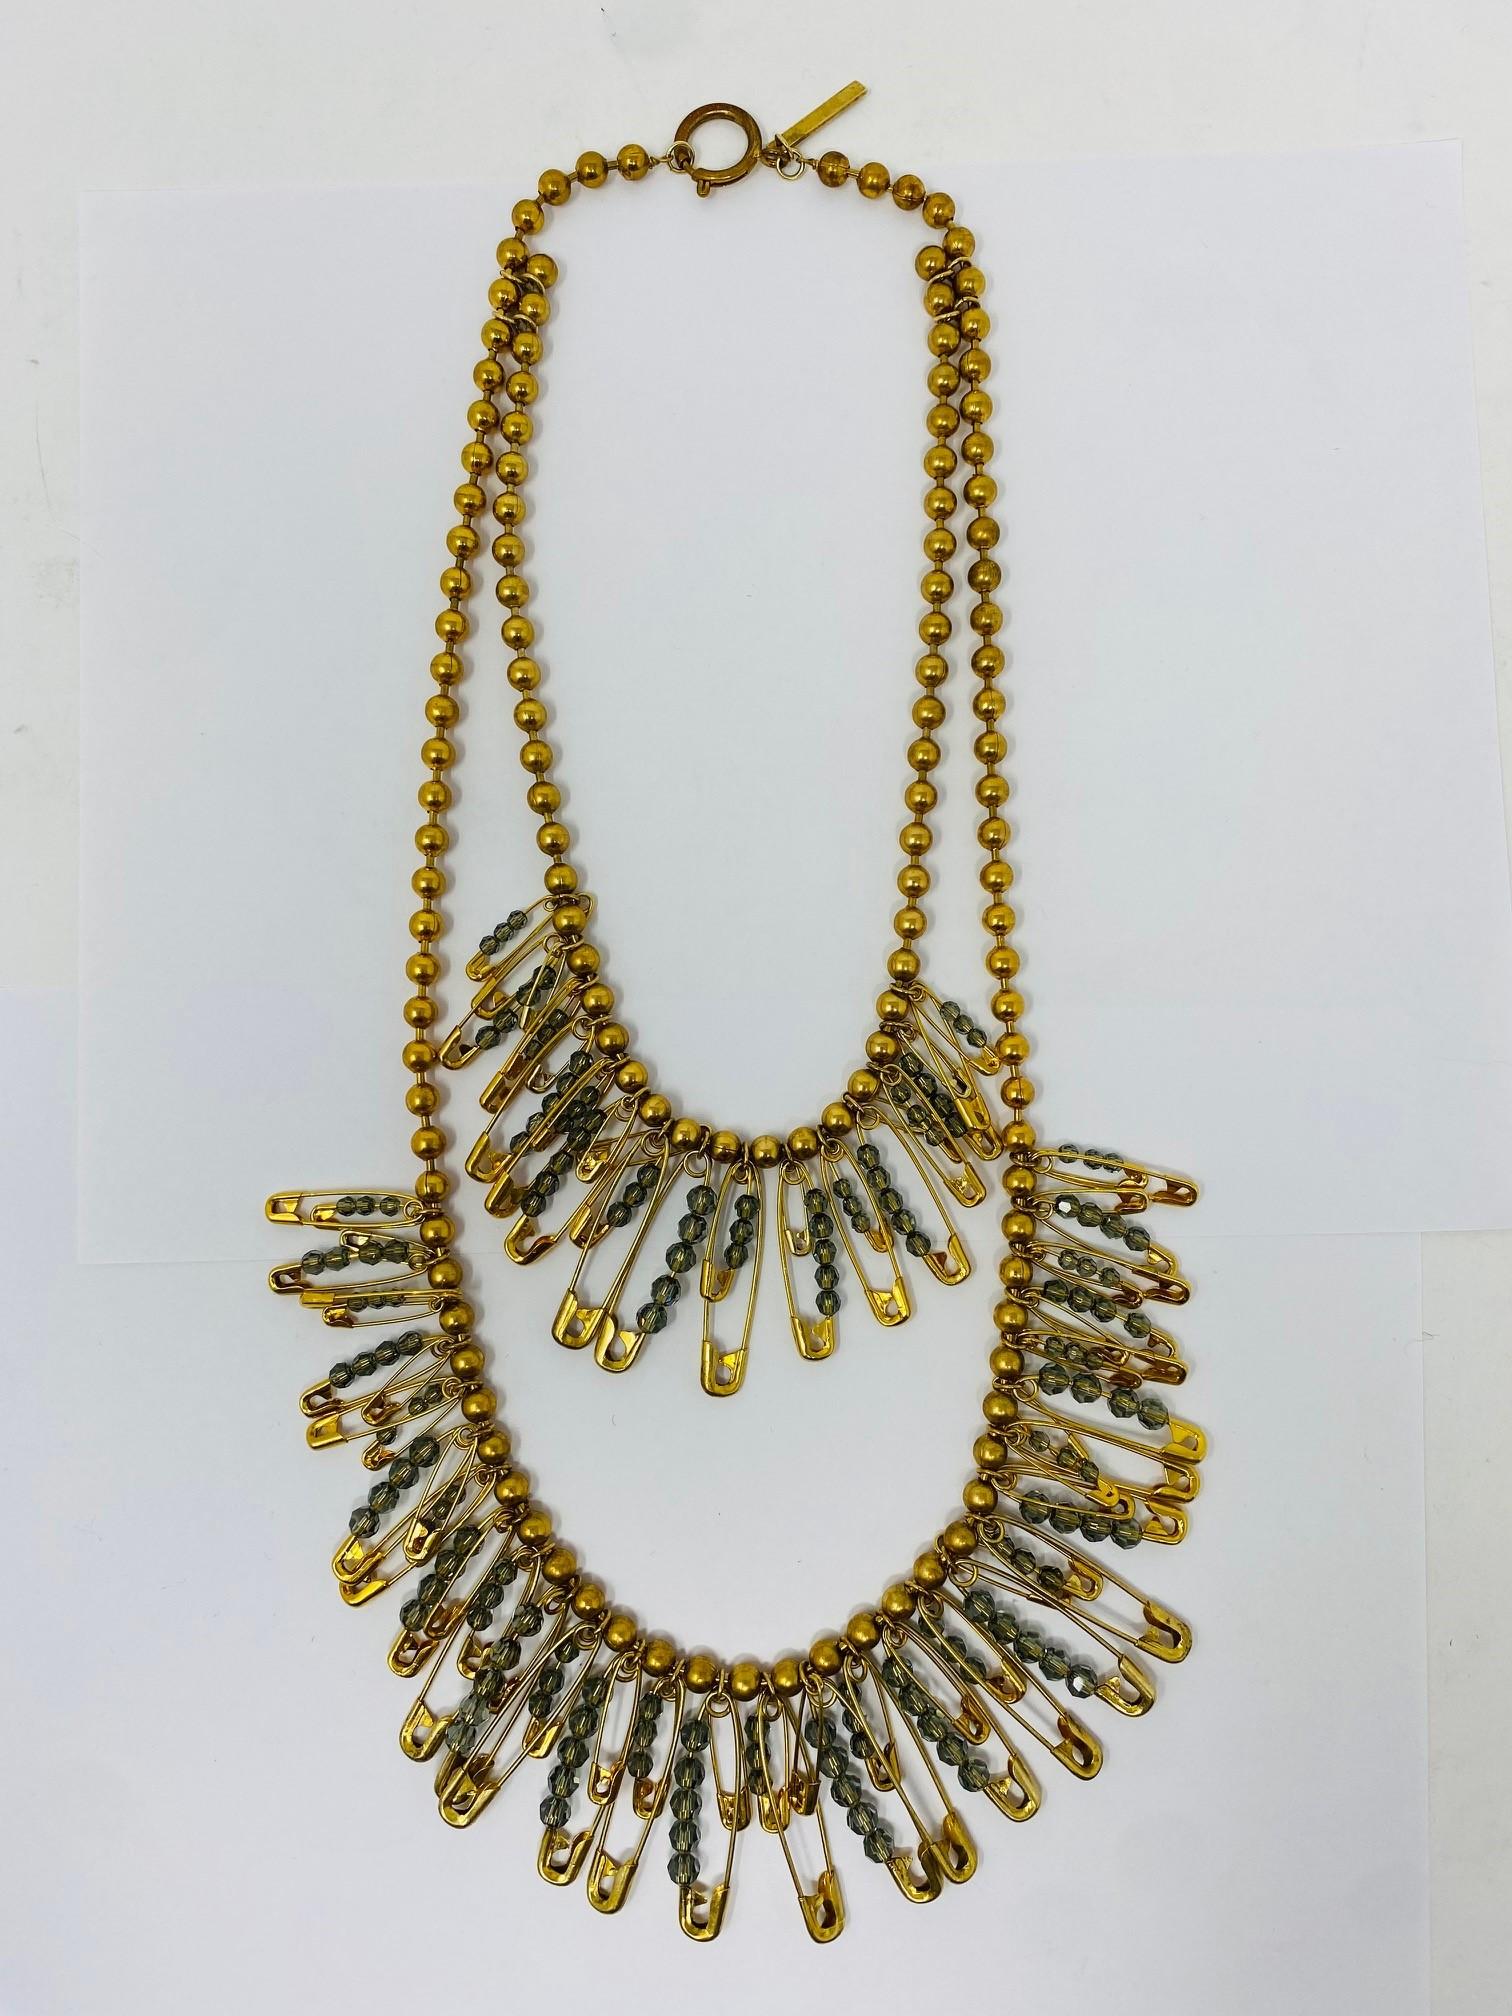 Beautiful and intricate jewerly piece by Marc Jacobs.  This incredible piece of jewerly is created in brass and crystals.  The gold tone juxtaposed with the gray-blue crystals in safety pins, adorned thru two staggered lengths are incredibly modern